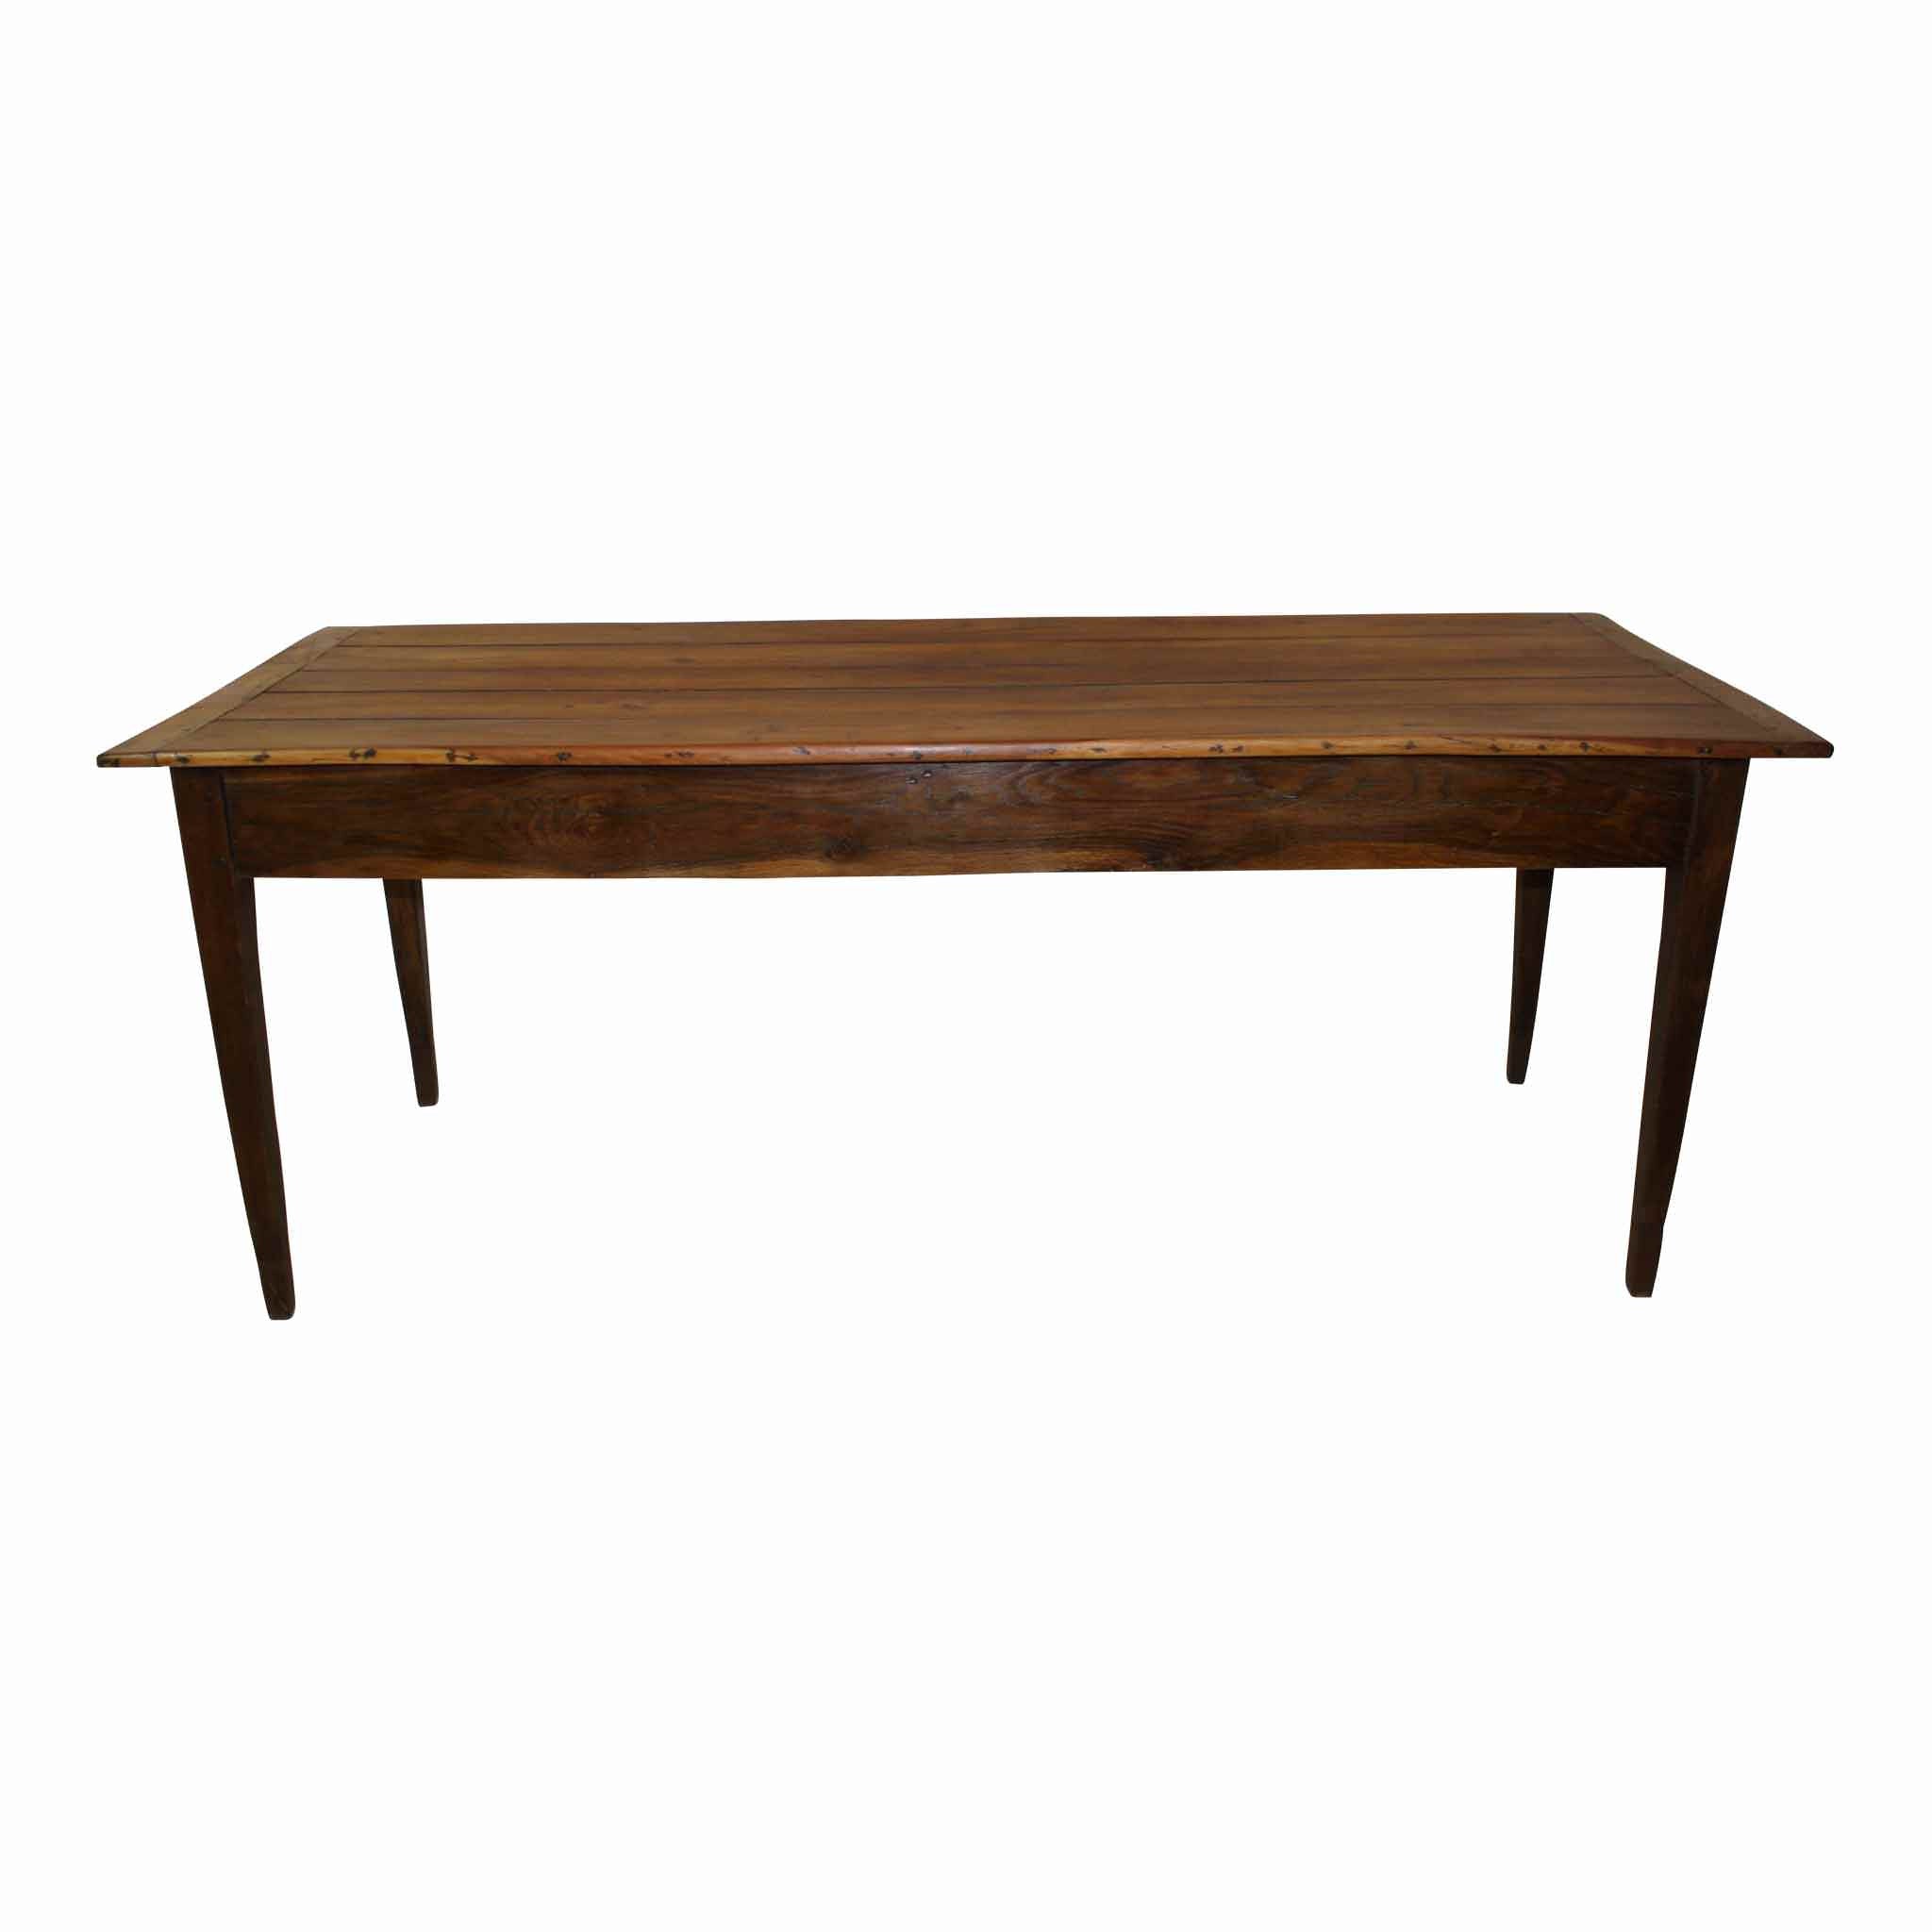 French Cherry and Oak Farm Table with Drawer